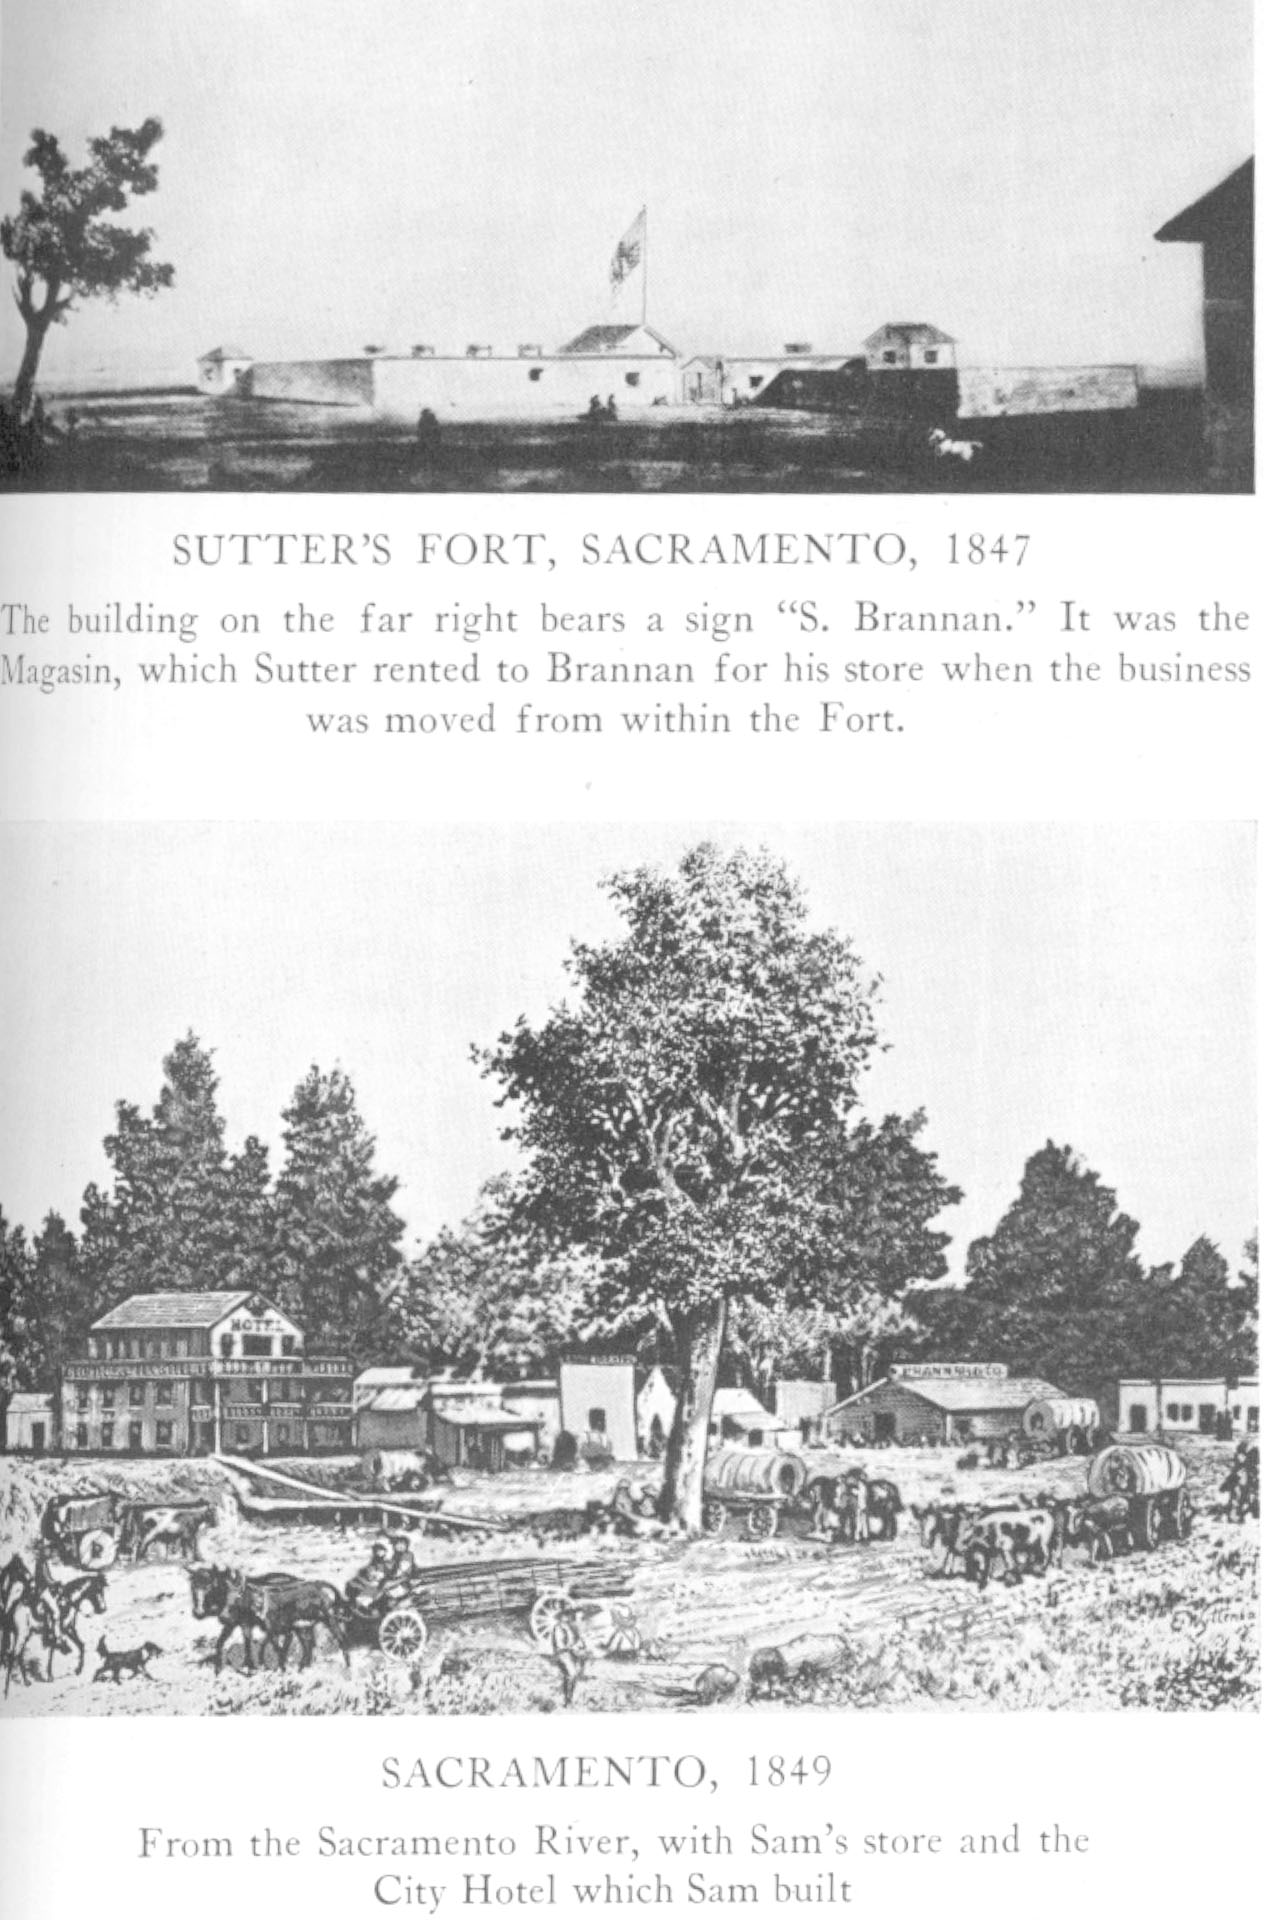 Samuel Brannan's stores in California -1847 and 1849